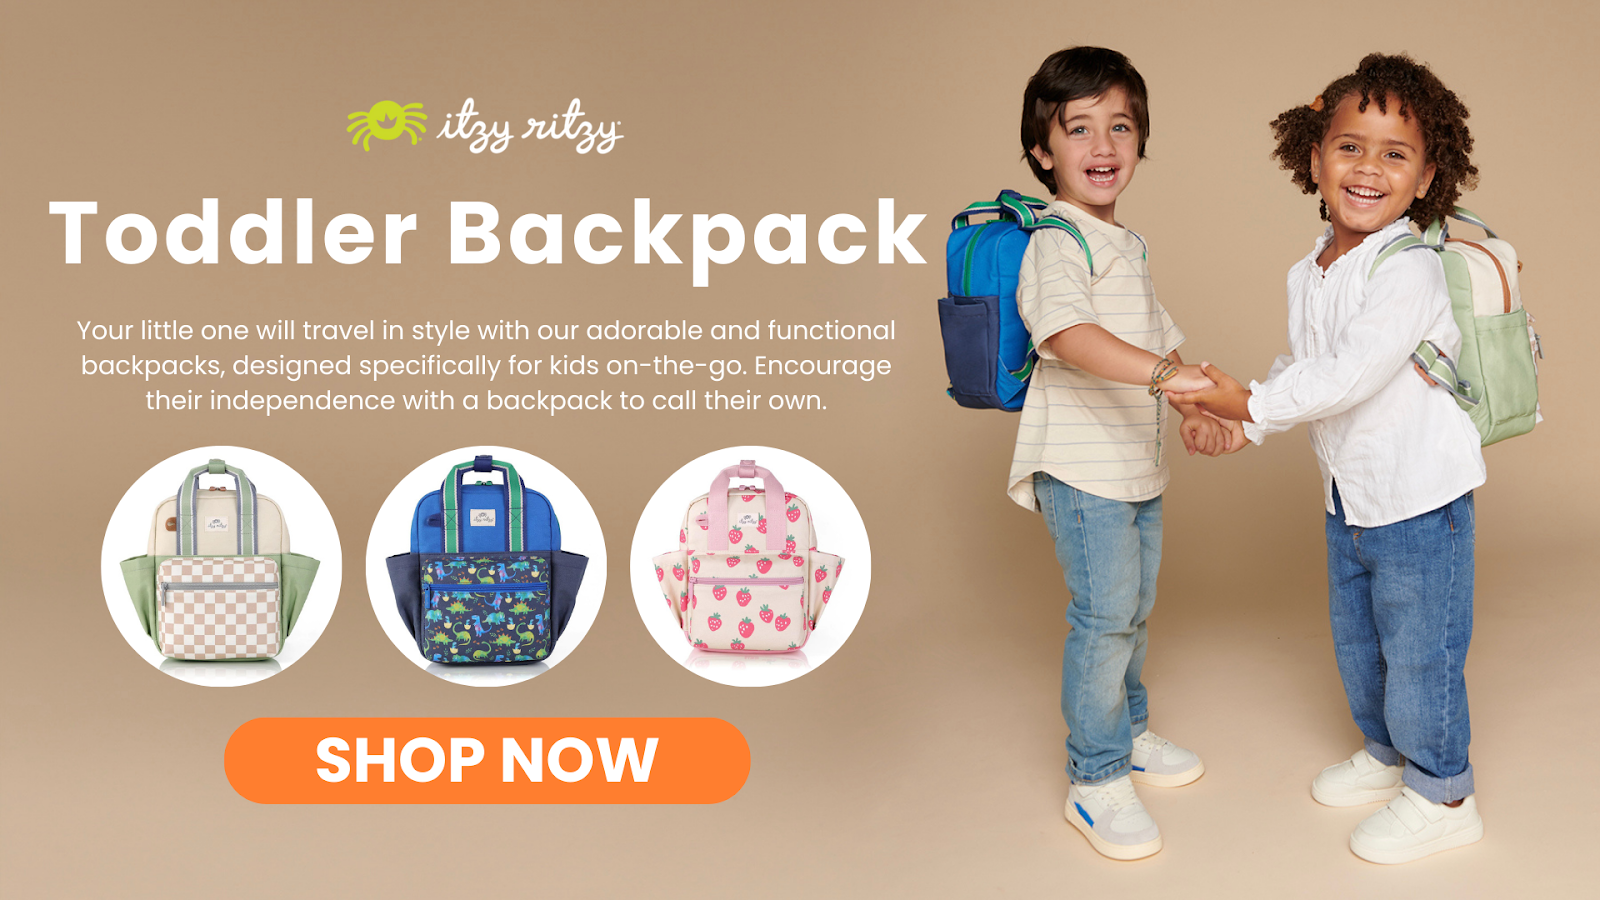 Itzy Ritzy’s Best Toddler Backpacks